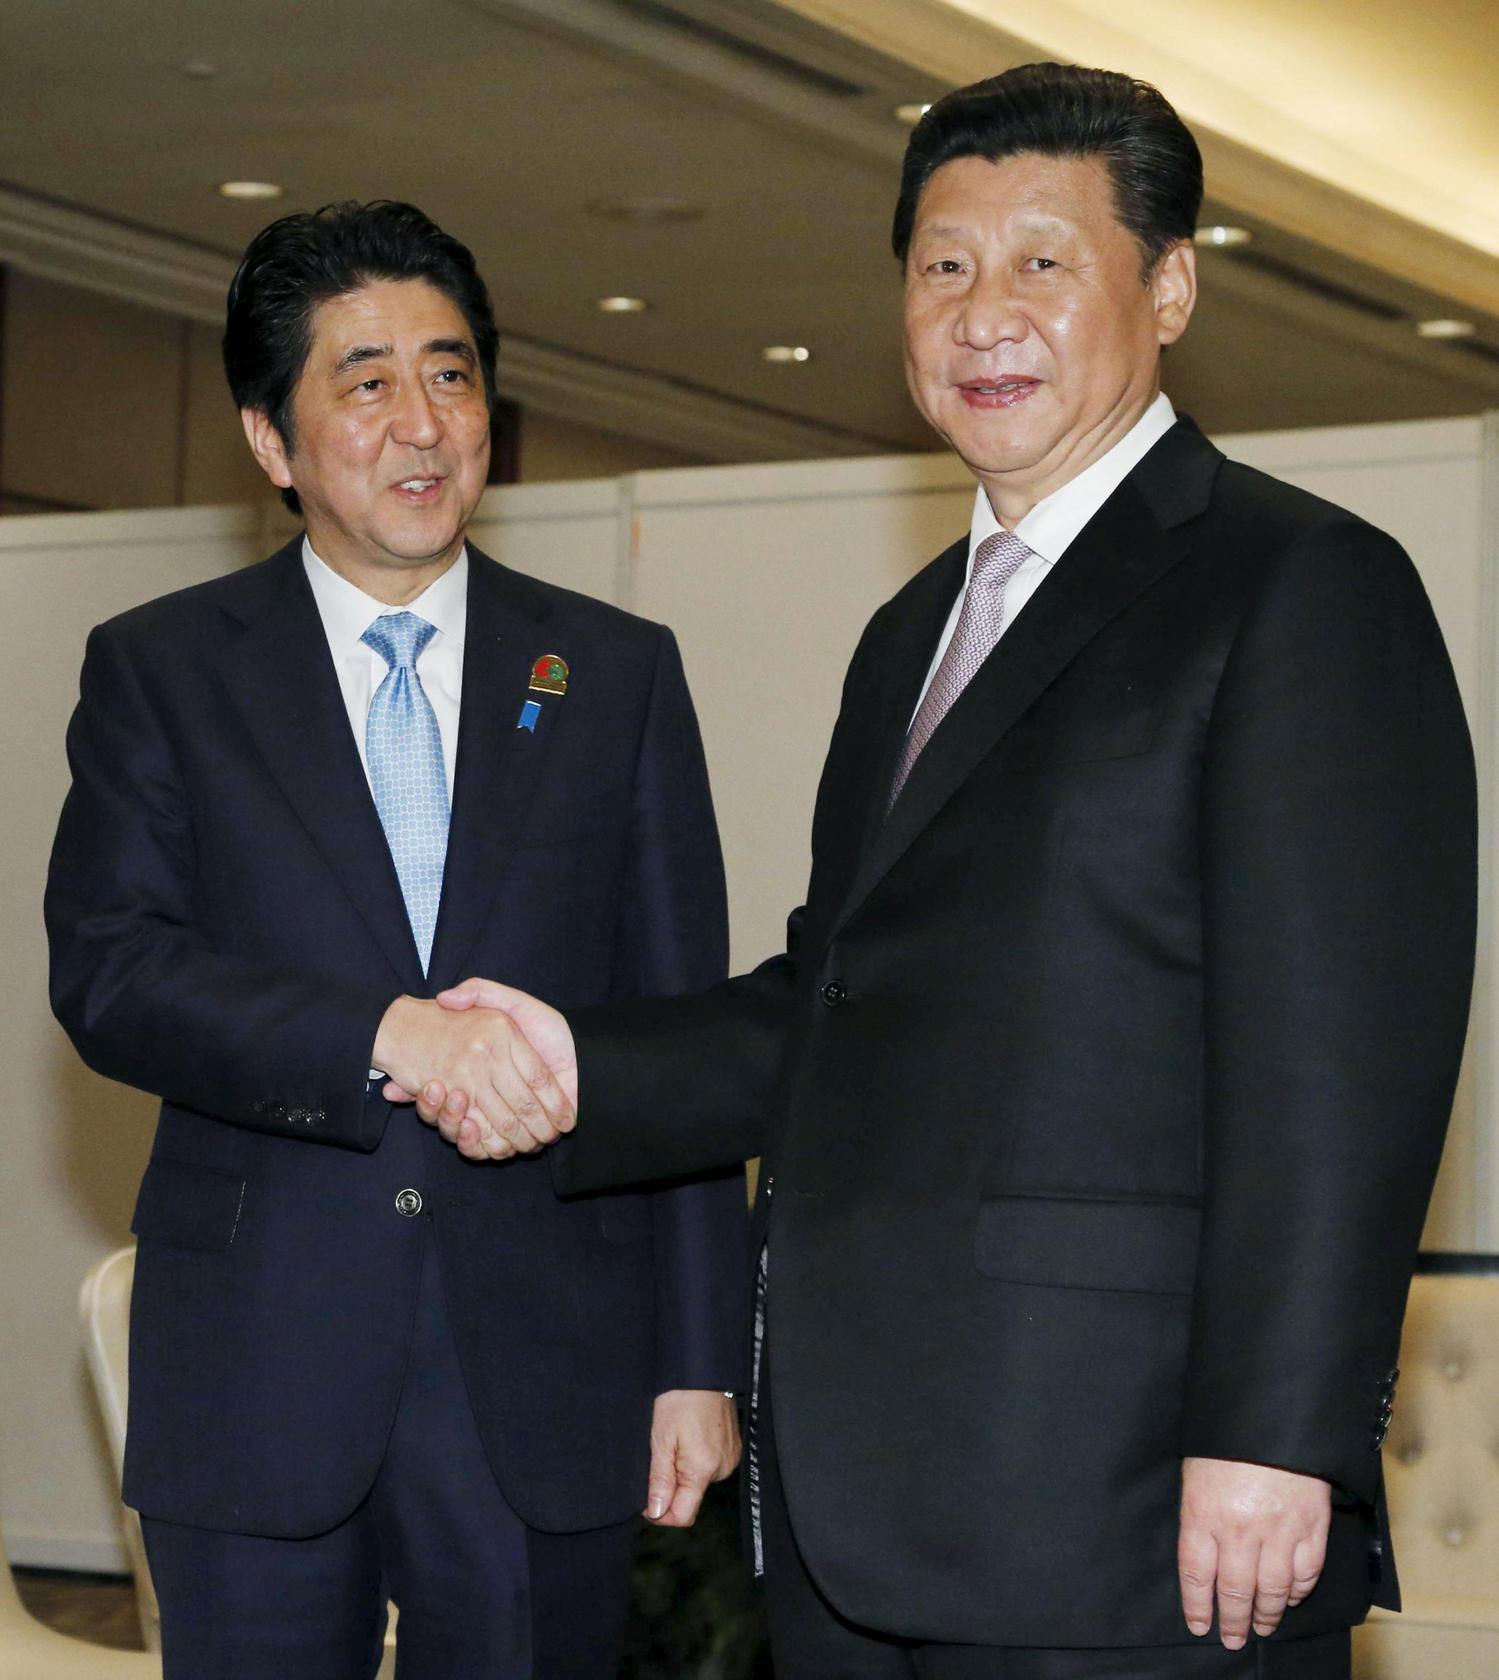 Prime Minister Shinzo Abe (left) with President Xi Jinping earlier this year.Intimate Rivals examines the effect China's rise has on Japan. Photo: Reuters